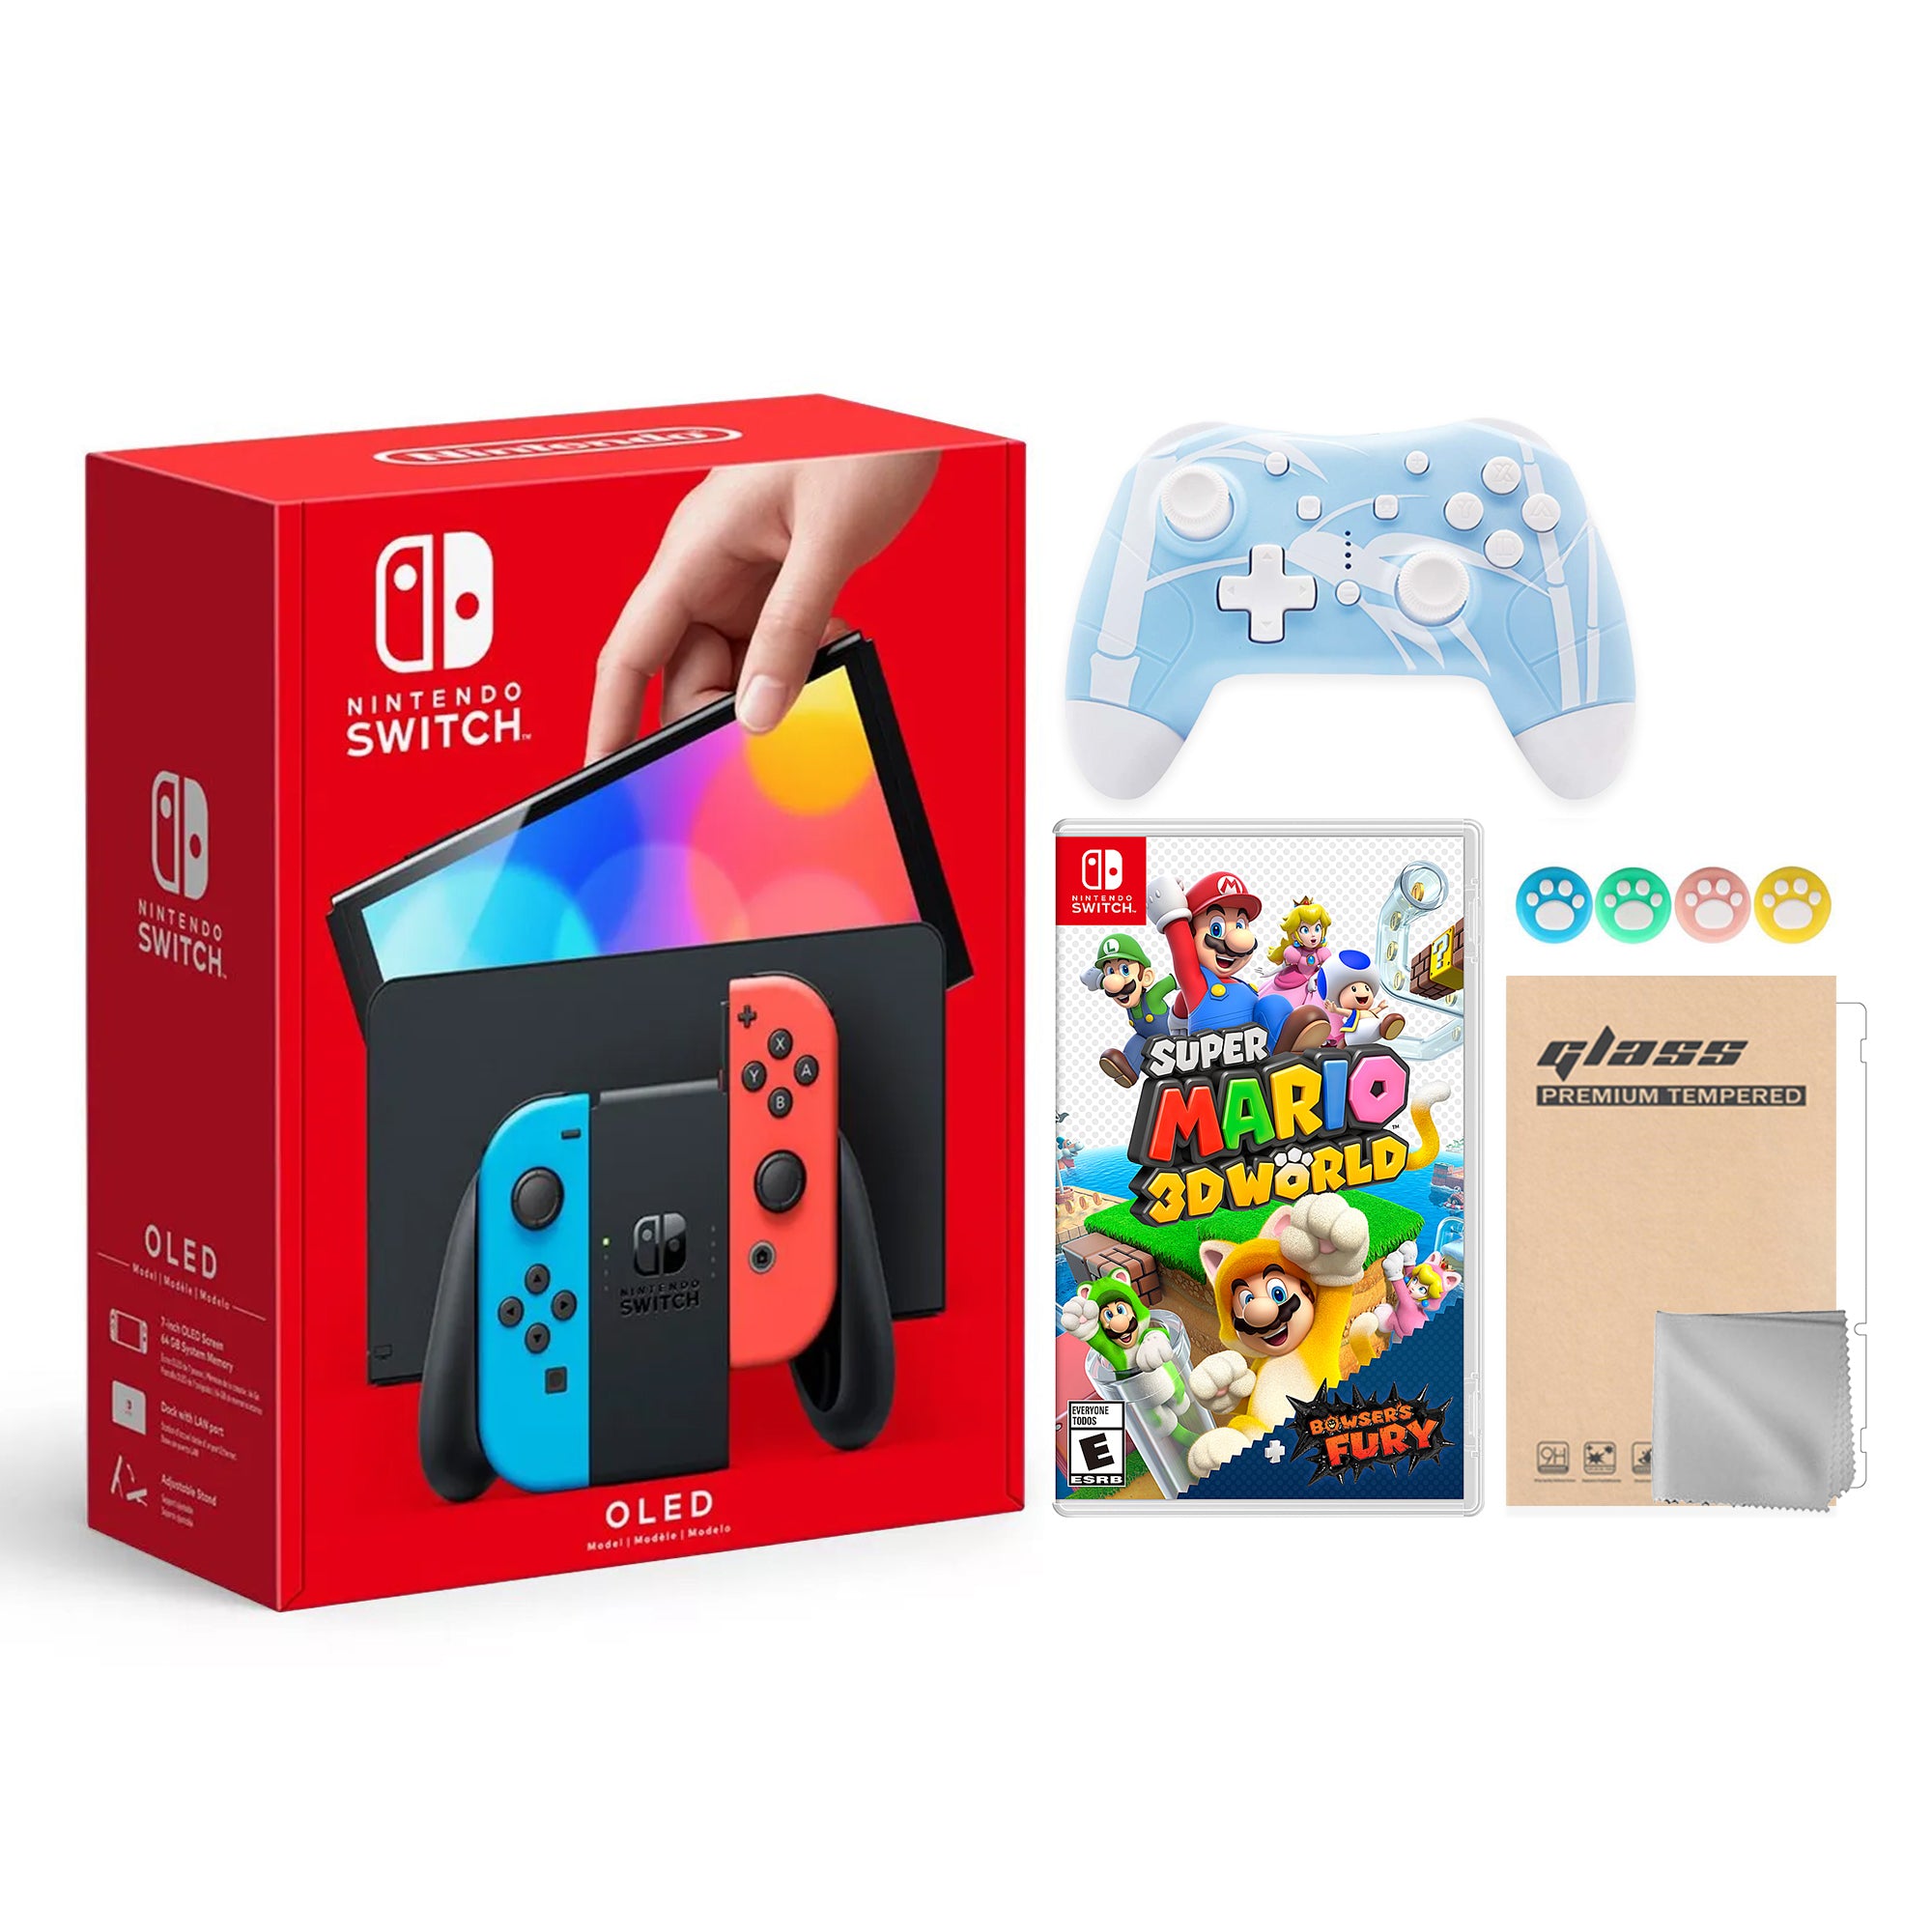 2022 New Nintendo Switch OLED Model Neon Red & Blue Joy Con 64GB Console HD Screen & LAN-Port Dock with Super Mario 3D World + Bowser's Fury, Mytrix Wireless Pro Controller and Accessories